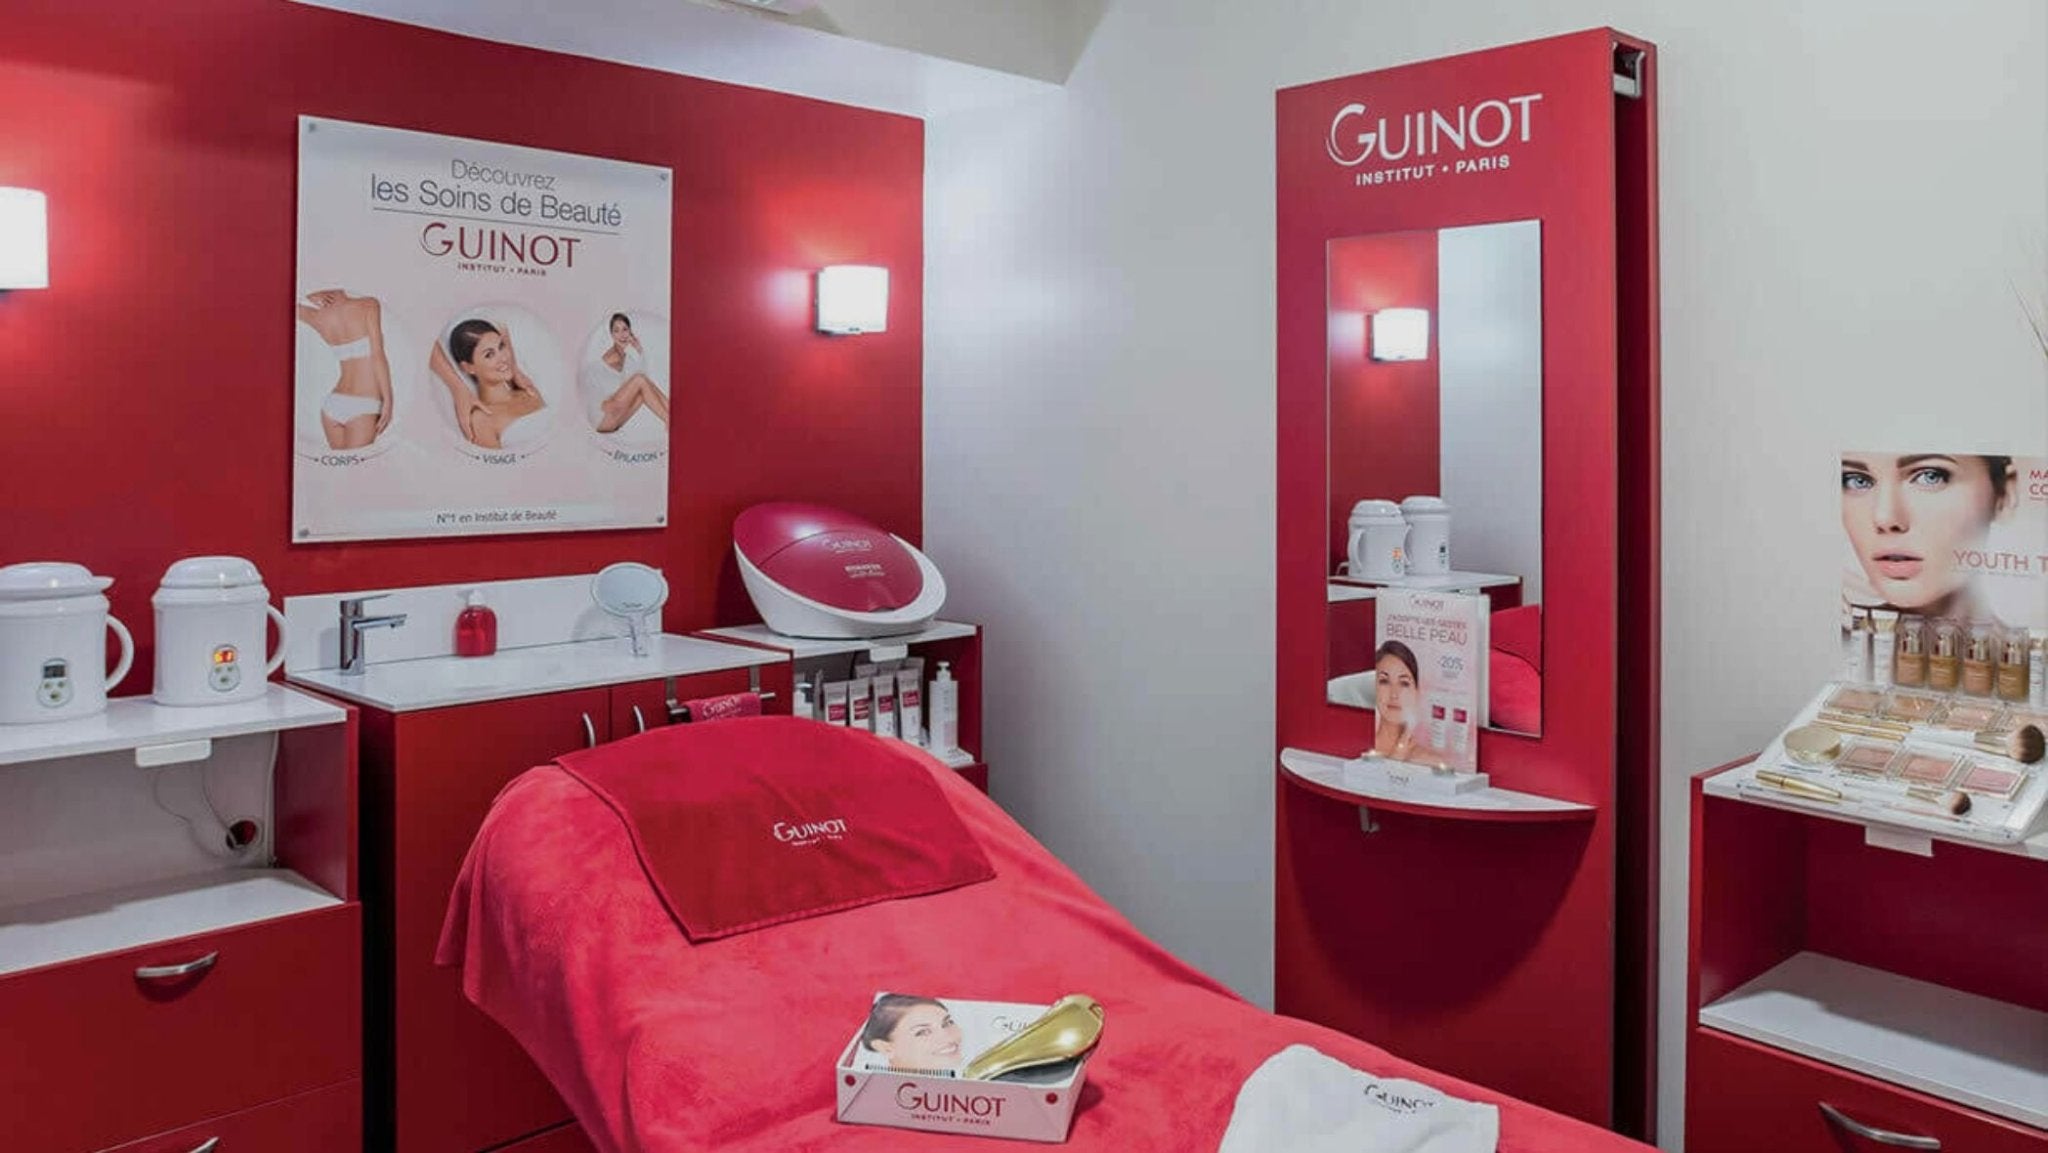 Guinot: an institution since 1963 - French Beauty Co.